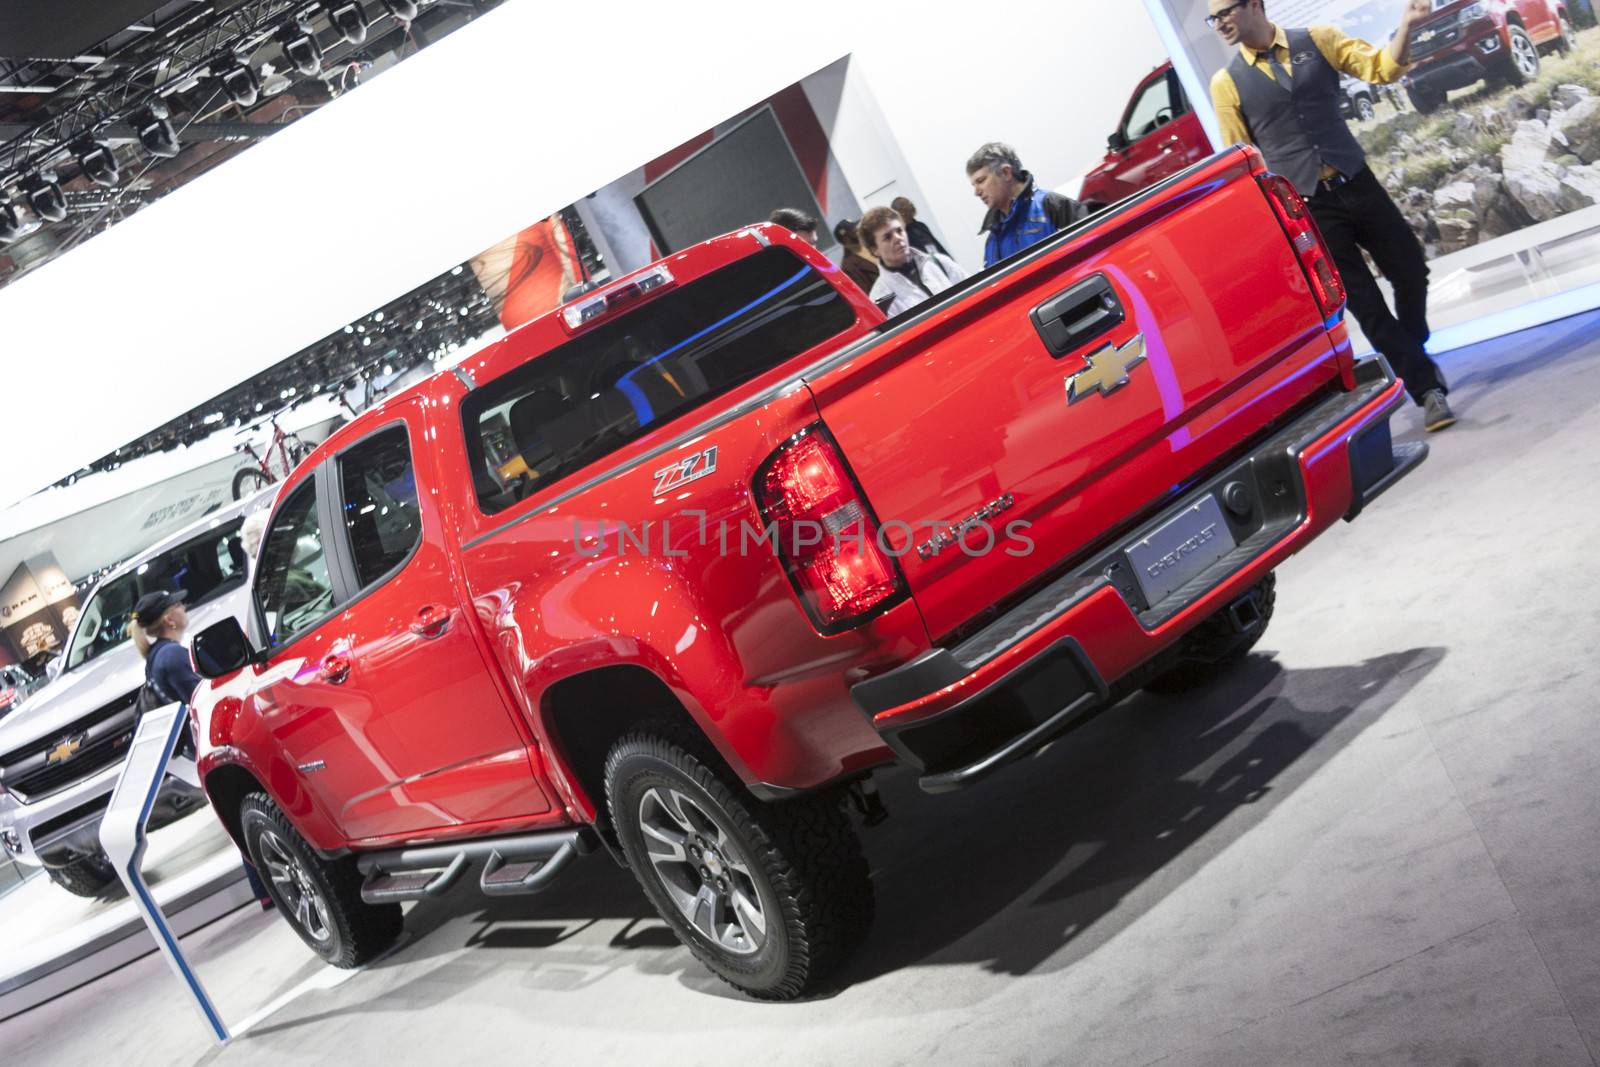 DETROIT - JANUARY 26 :The new 2015 Chevrolet Colorado truck at The North American International Auto Show January 26, 2014 in Detroit, Michigan.